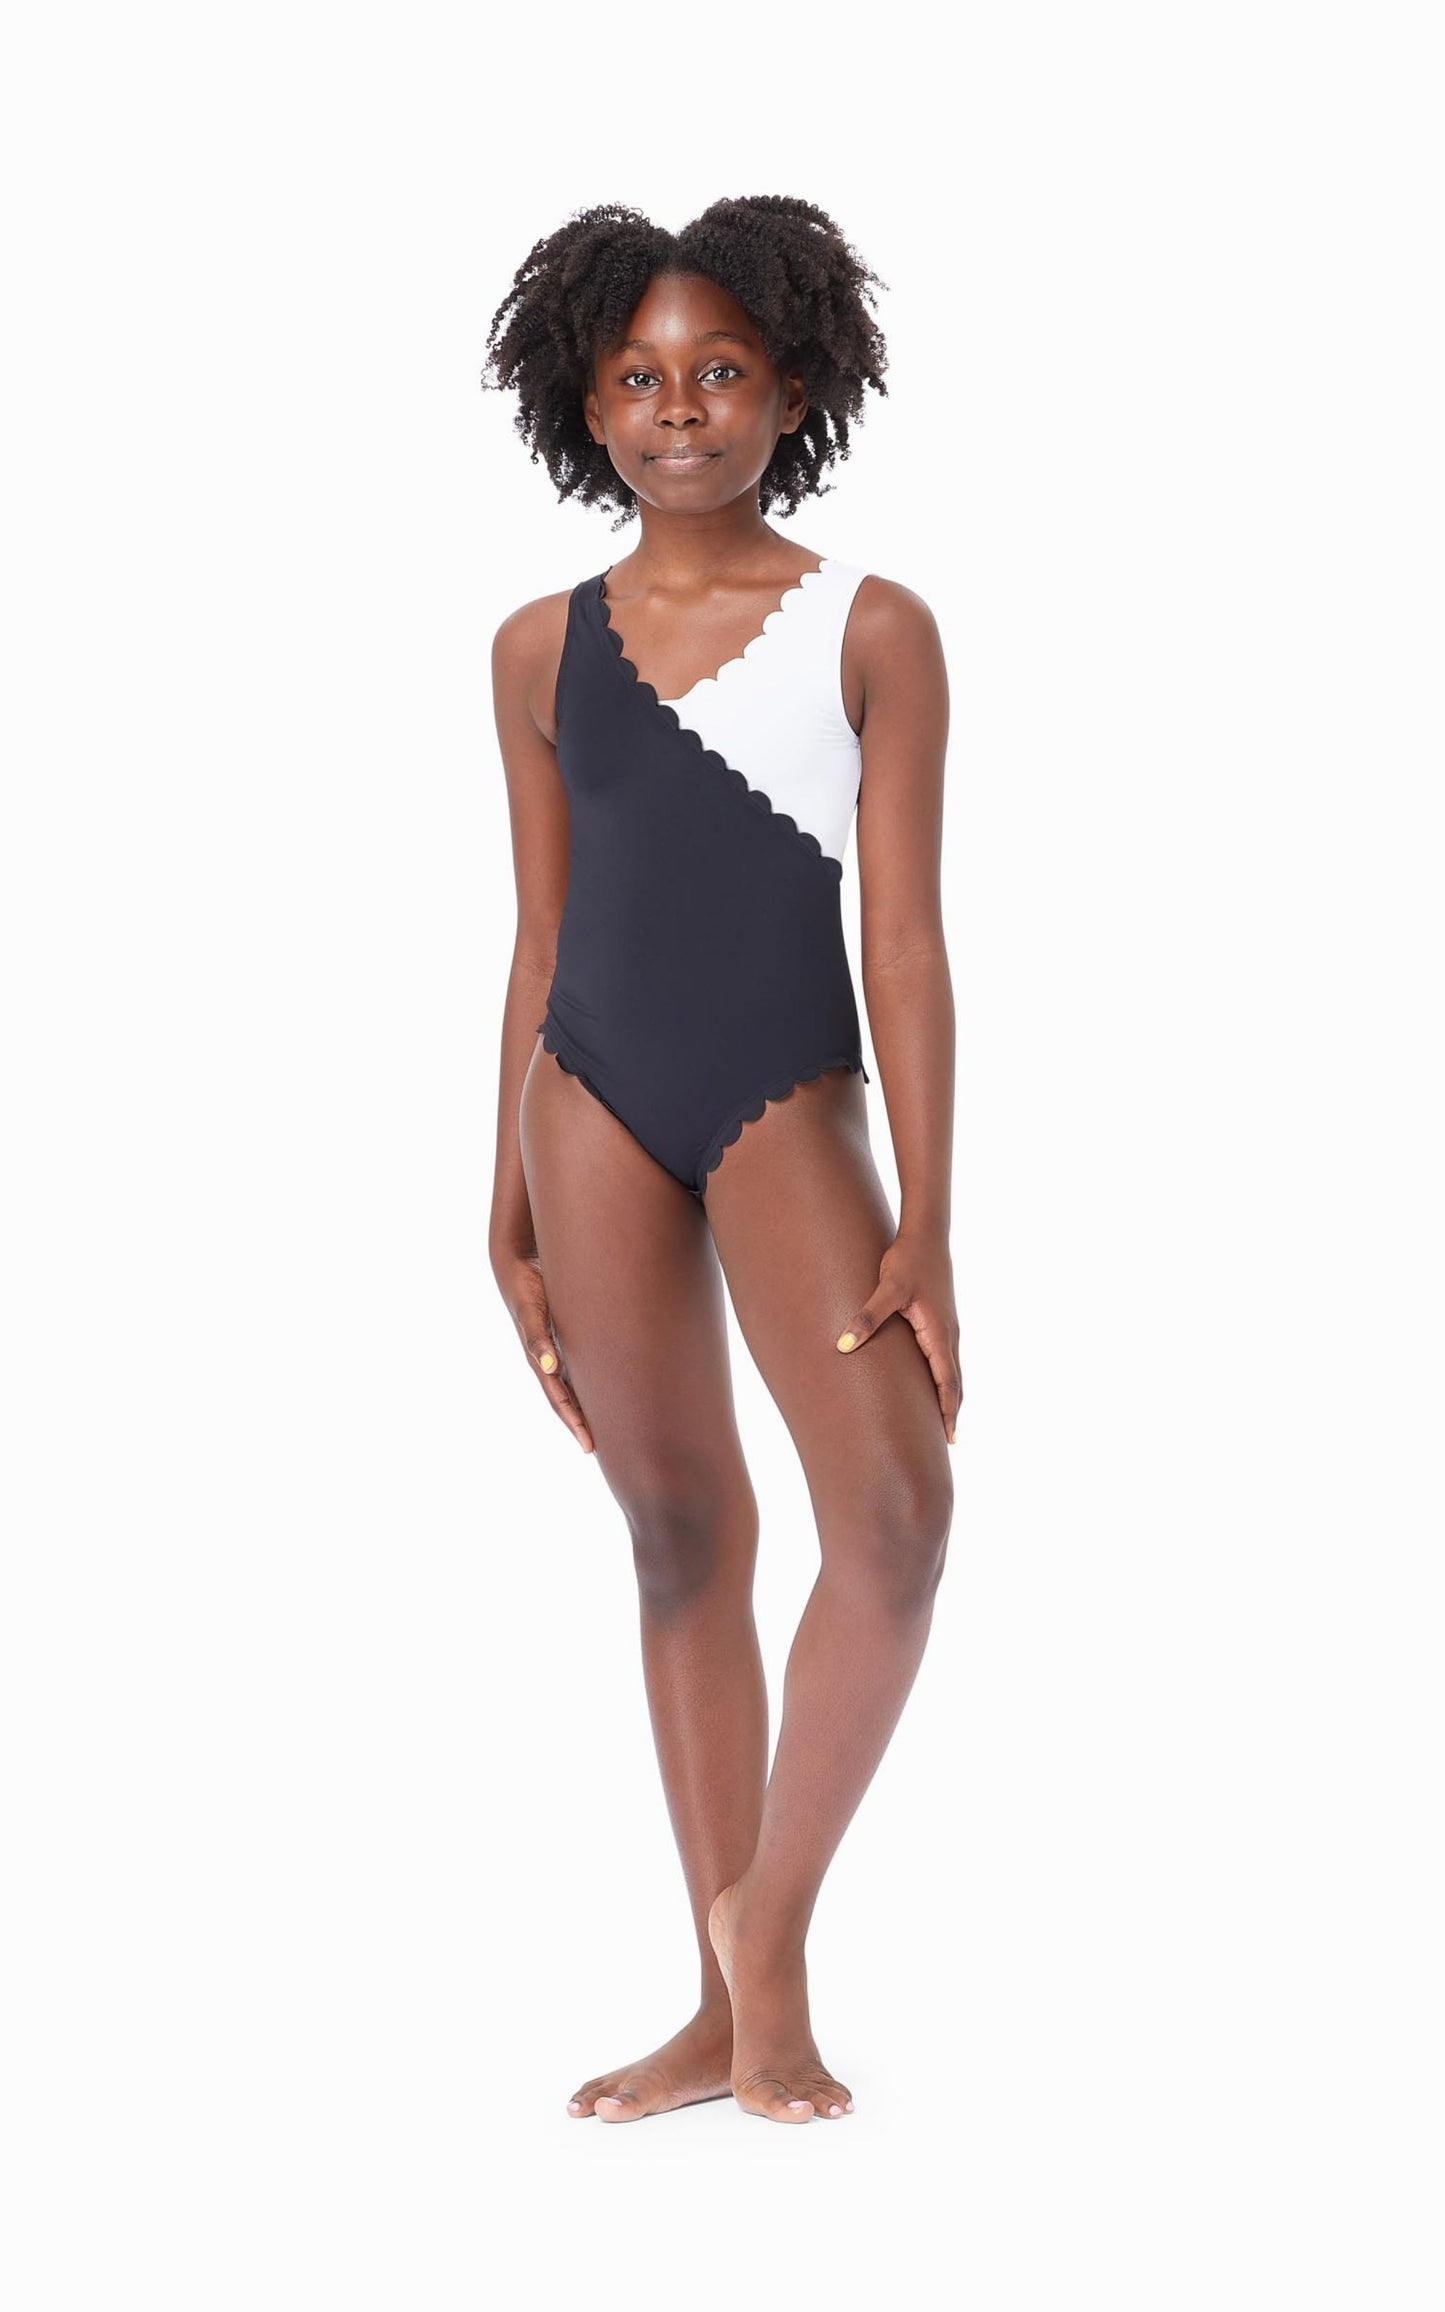 Young girl wearing black-and-white color block one-piece swimsuit with scalloped trim